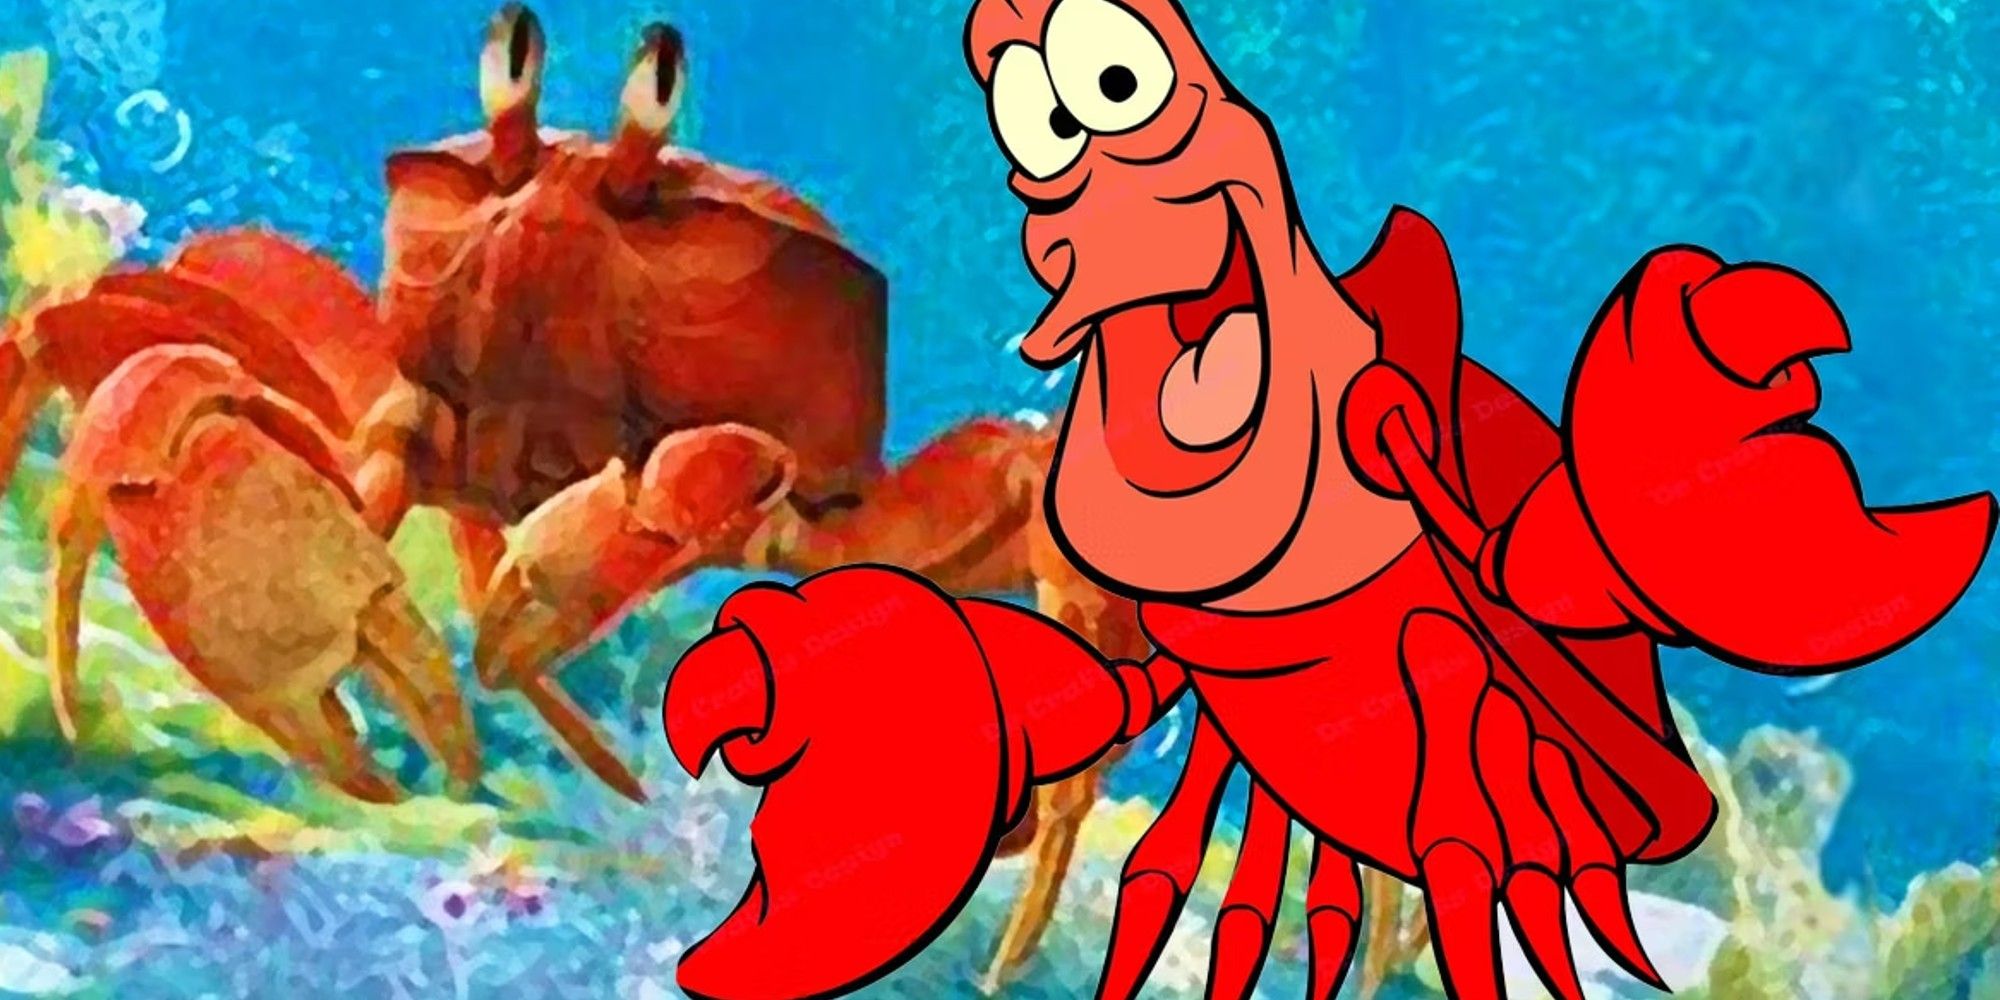 A blended image features the live-action ghost crab Sebastian and the 1989 animated Sebastian for Disney's The Little Mermaid